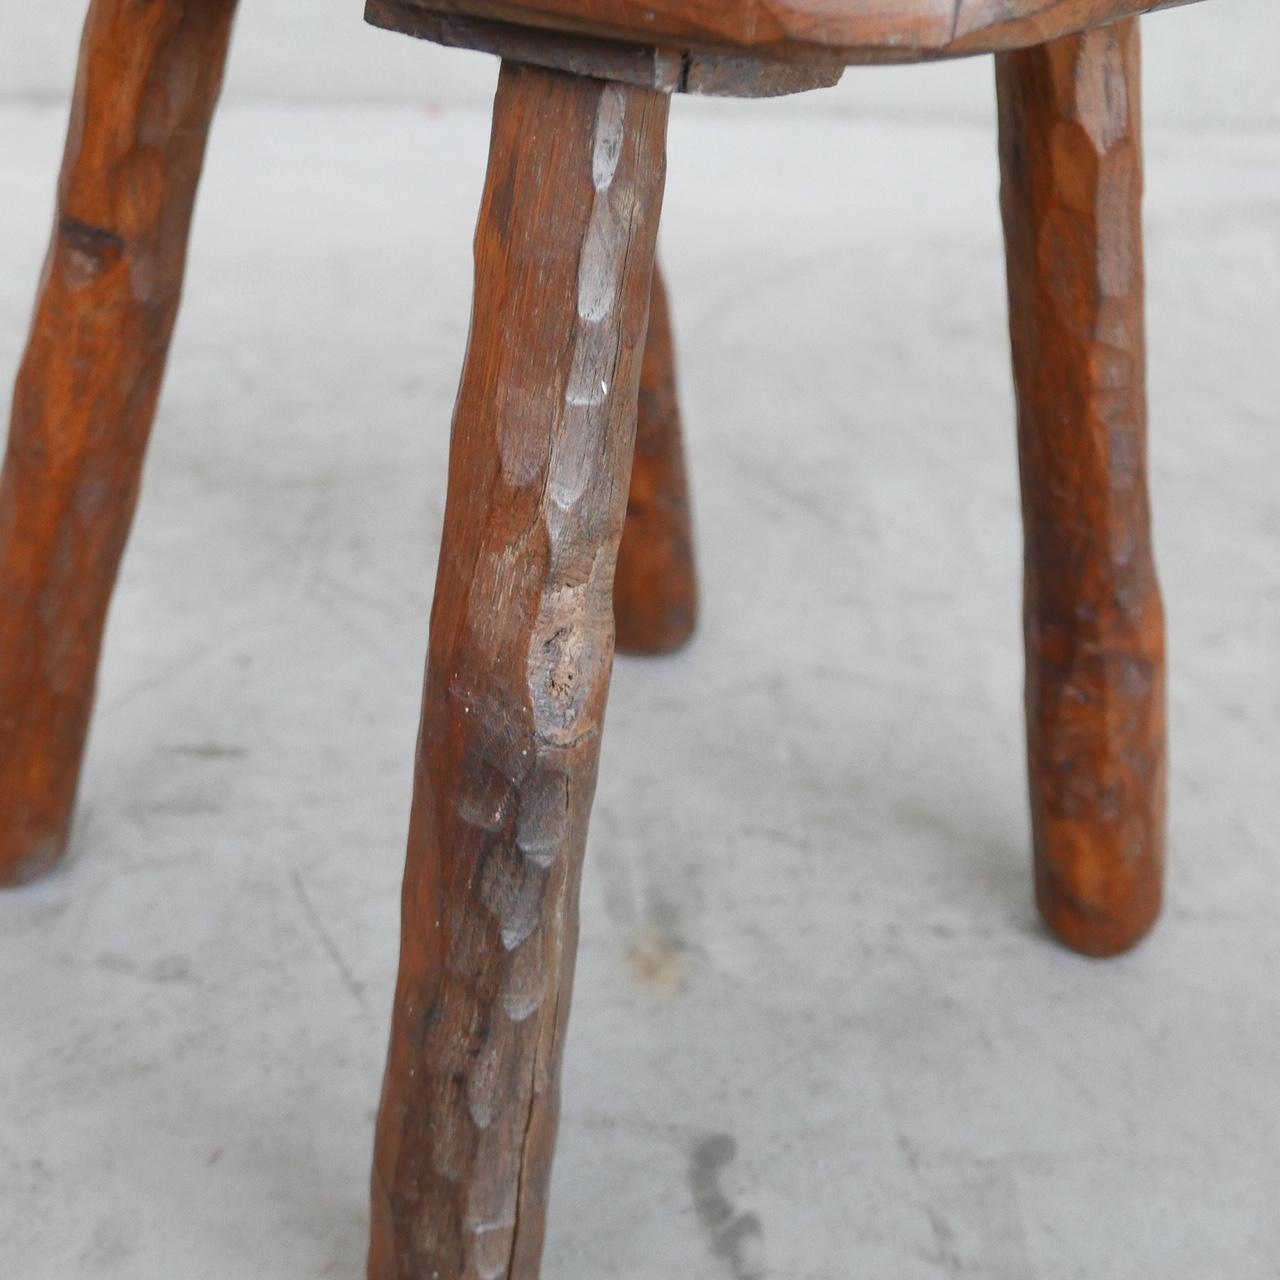 A singular brutalist occasional chair. 

Naively made, in primitive form. 

Belgium, c1950s. 

Oak. 

Good condition, some wear commensurate with age. 

Location: Belgium Gallery. 

Dimensions: 33 W x 40 D x 31 seat height x 73 total